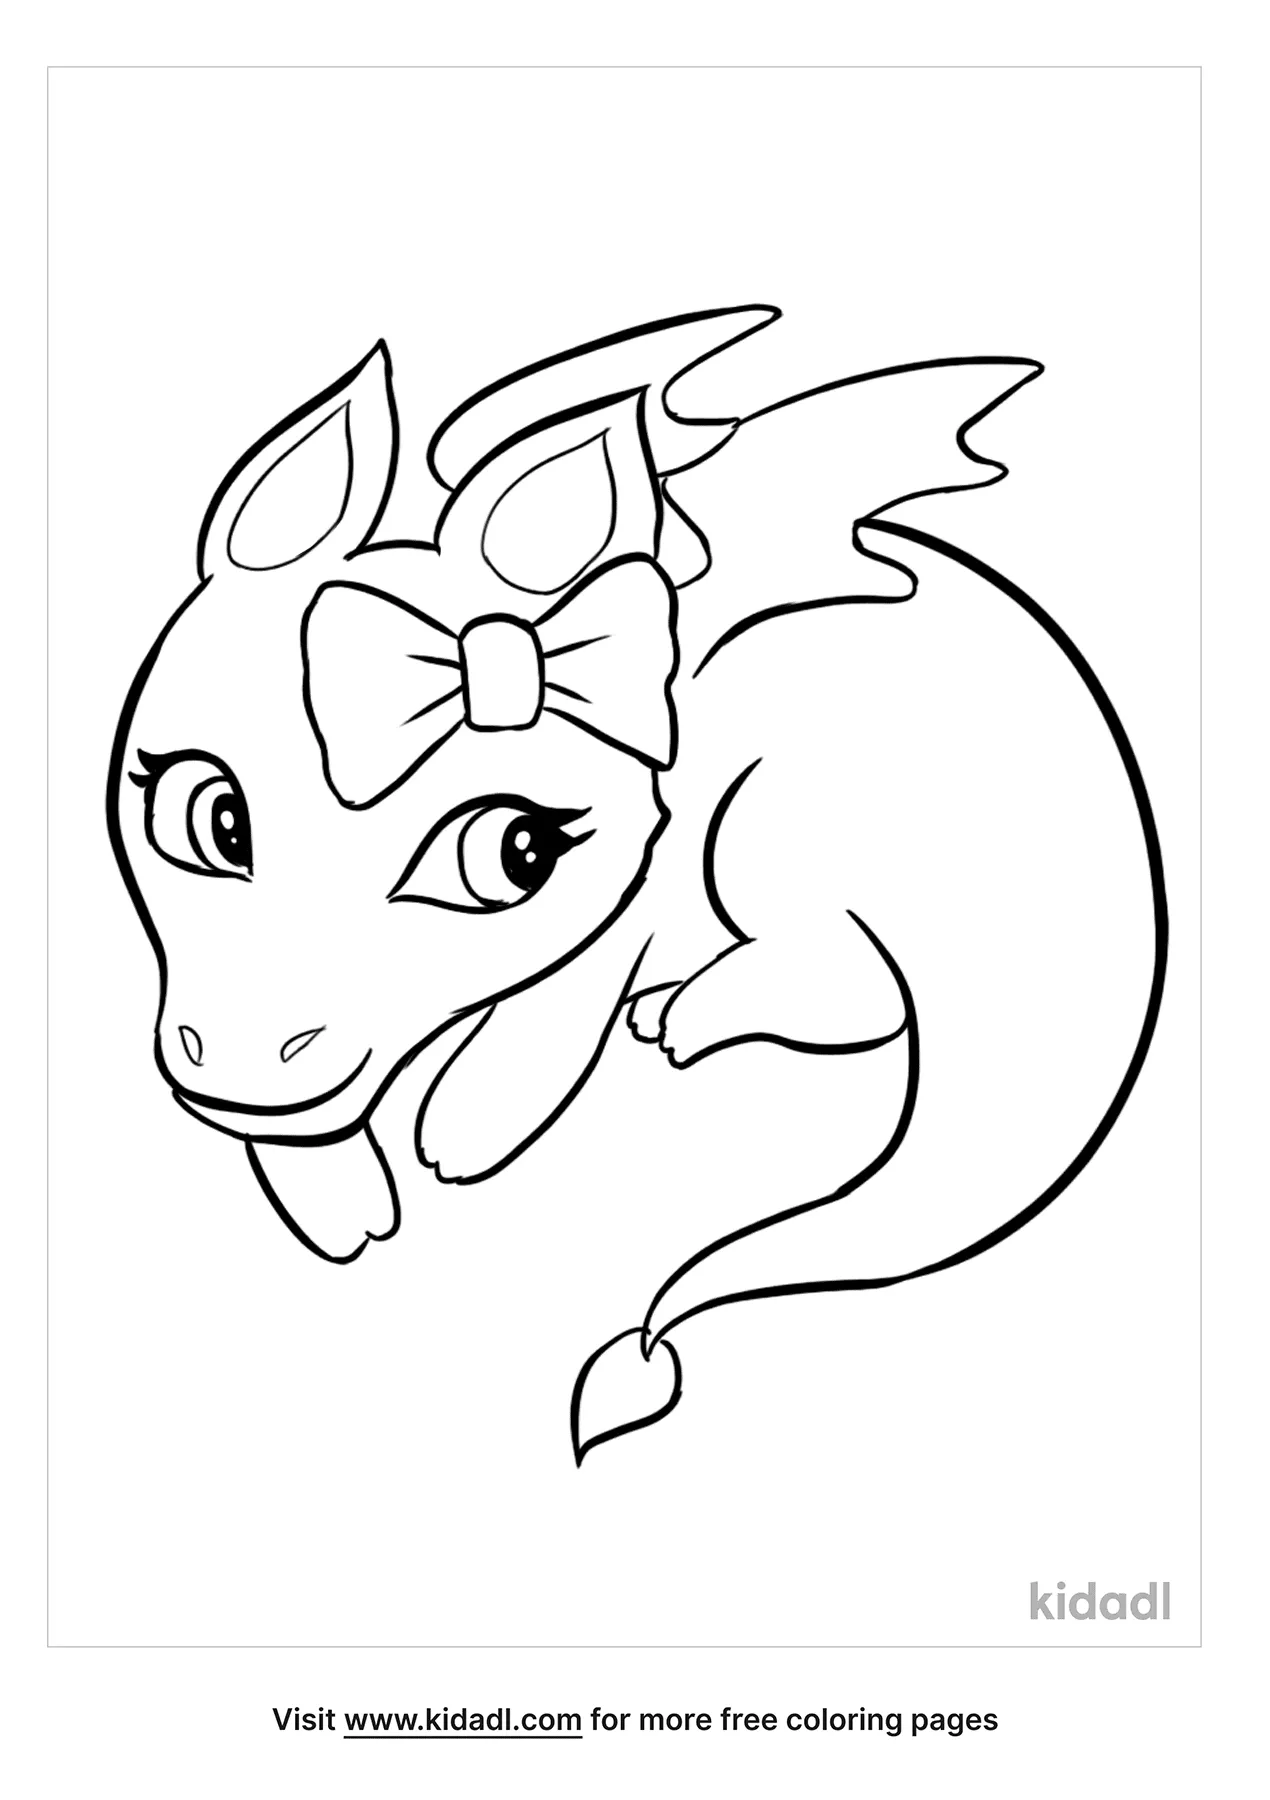 Dragon With Bow Coloring Page